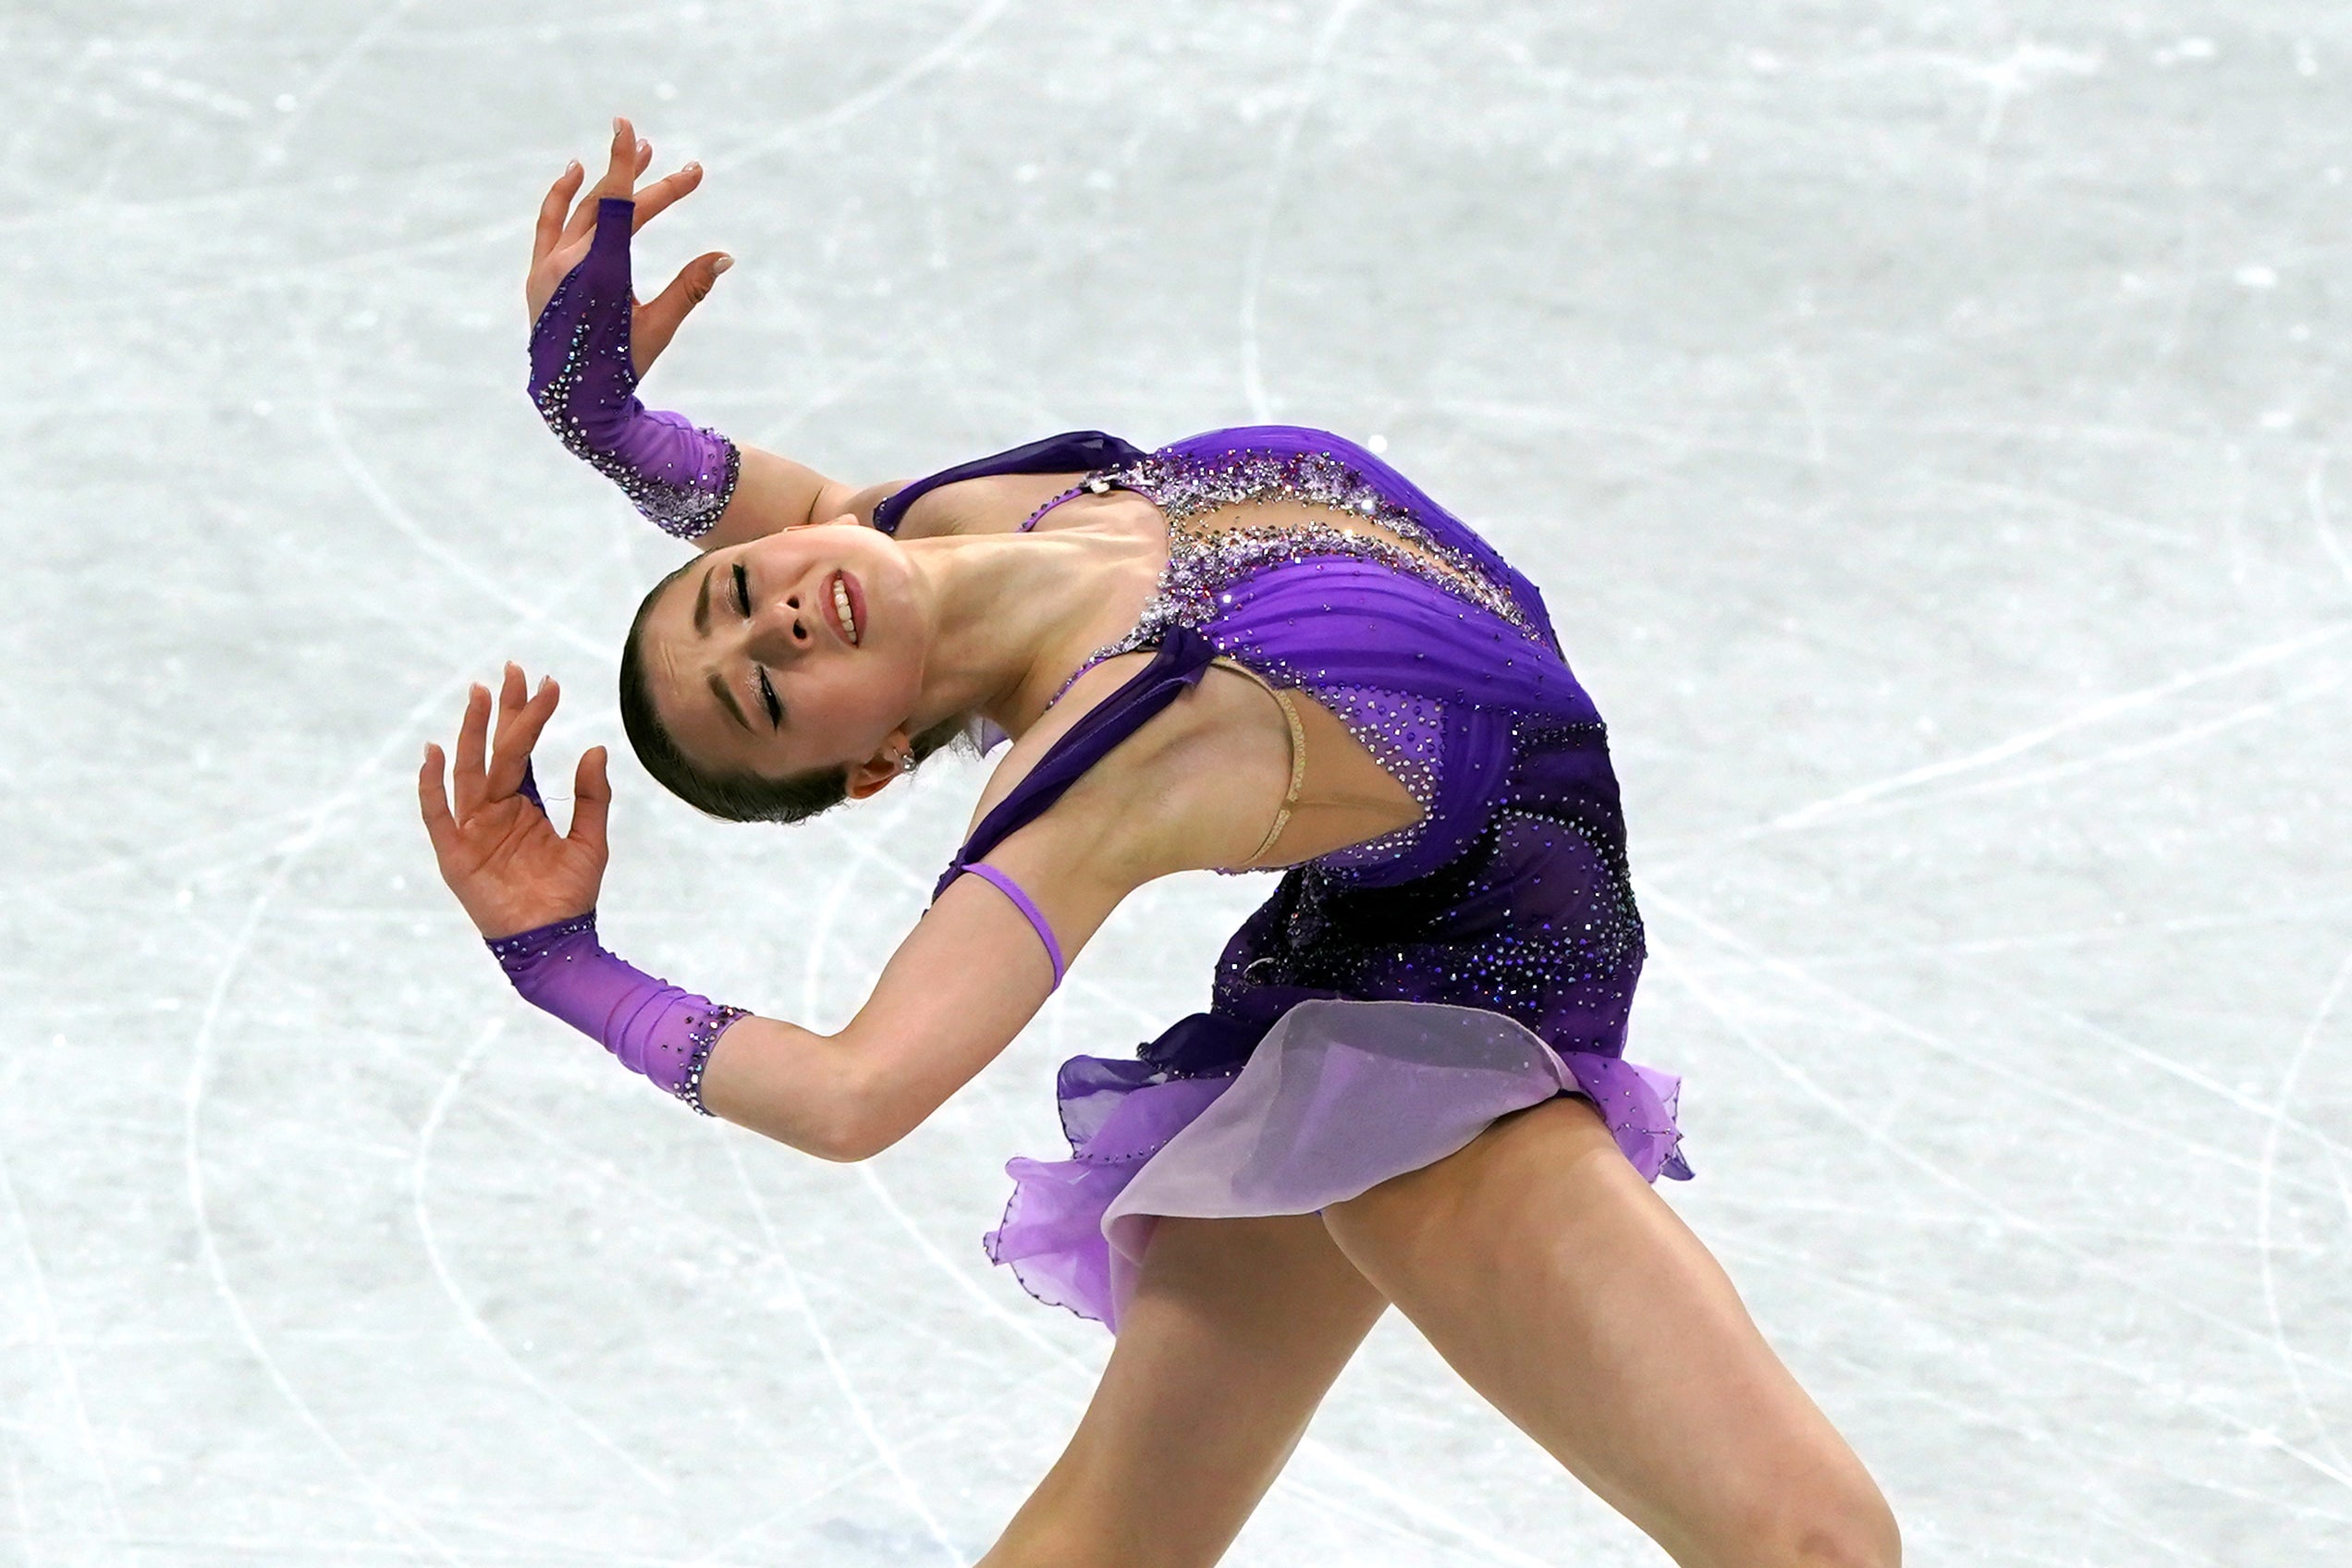 IOC president Thomas Bach launched a scathing attack on the team behind Kamila Valieva, the 15-year-old figure skater at the centre of a drugs probe who wilted under the global glare of the Winter Olympics in Beijing (Andrew Milligan/PA)